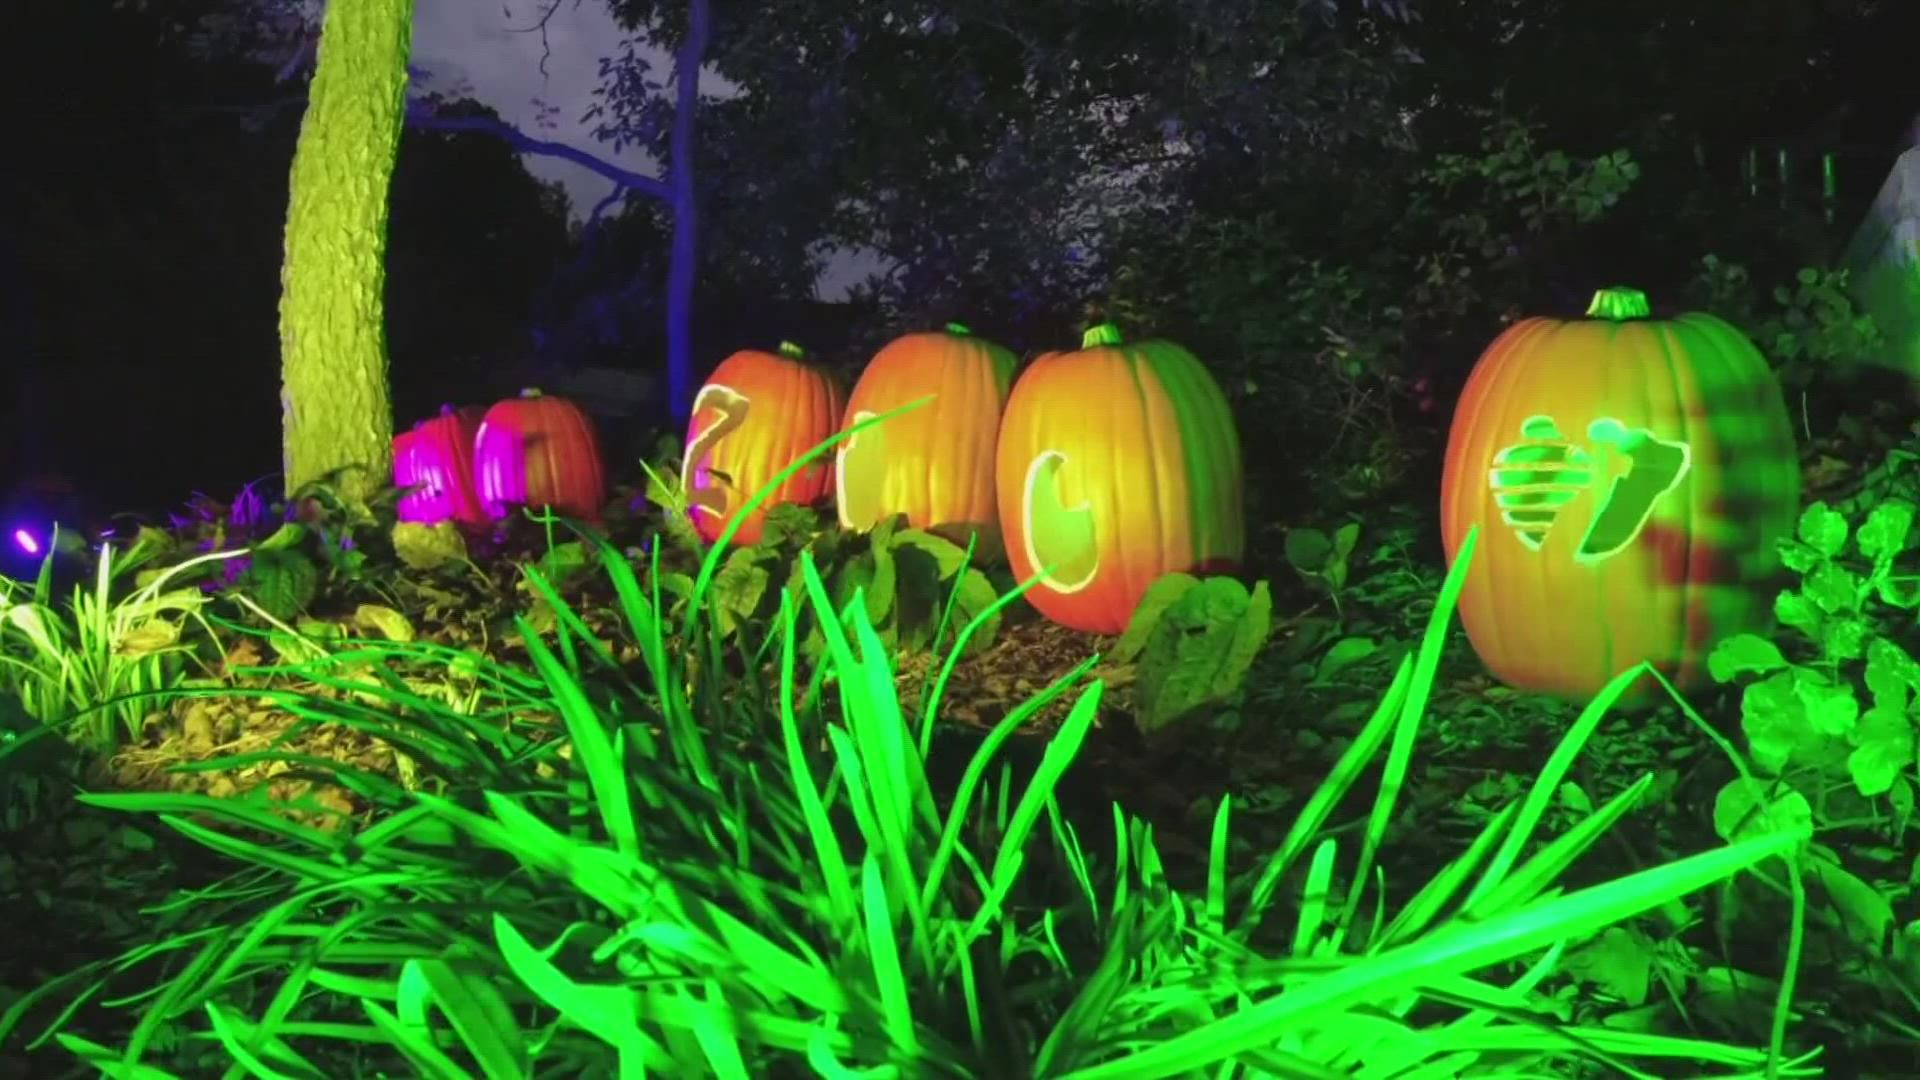 The Wixom-based Bluewater Technologies teamed up with John Ball Zoo in 2020 for "IllumiZoo." Since then, the idea has expanded across the country.